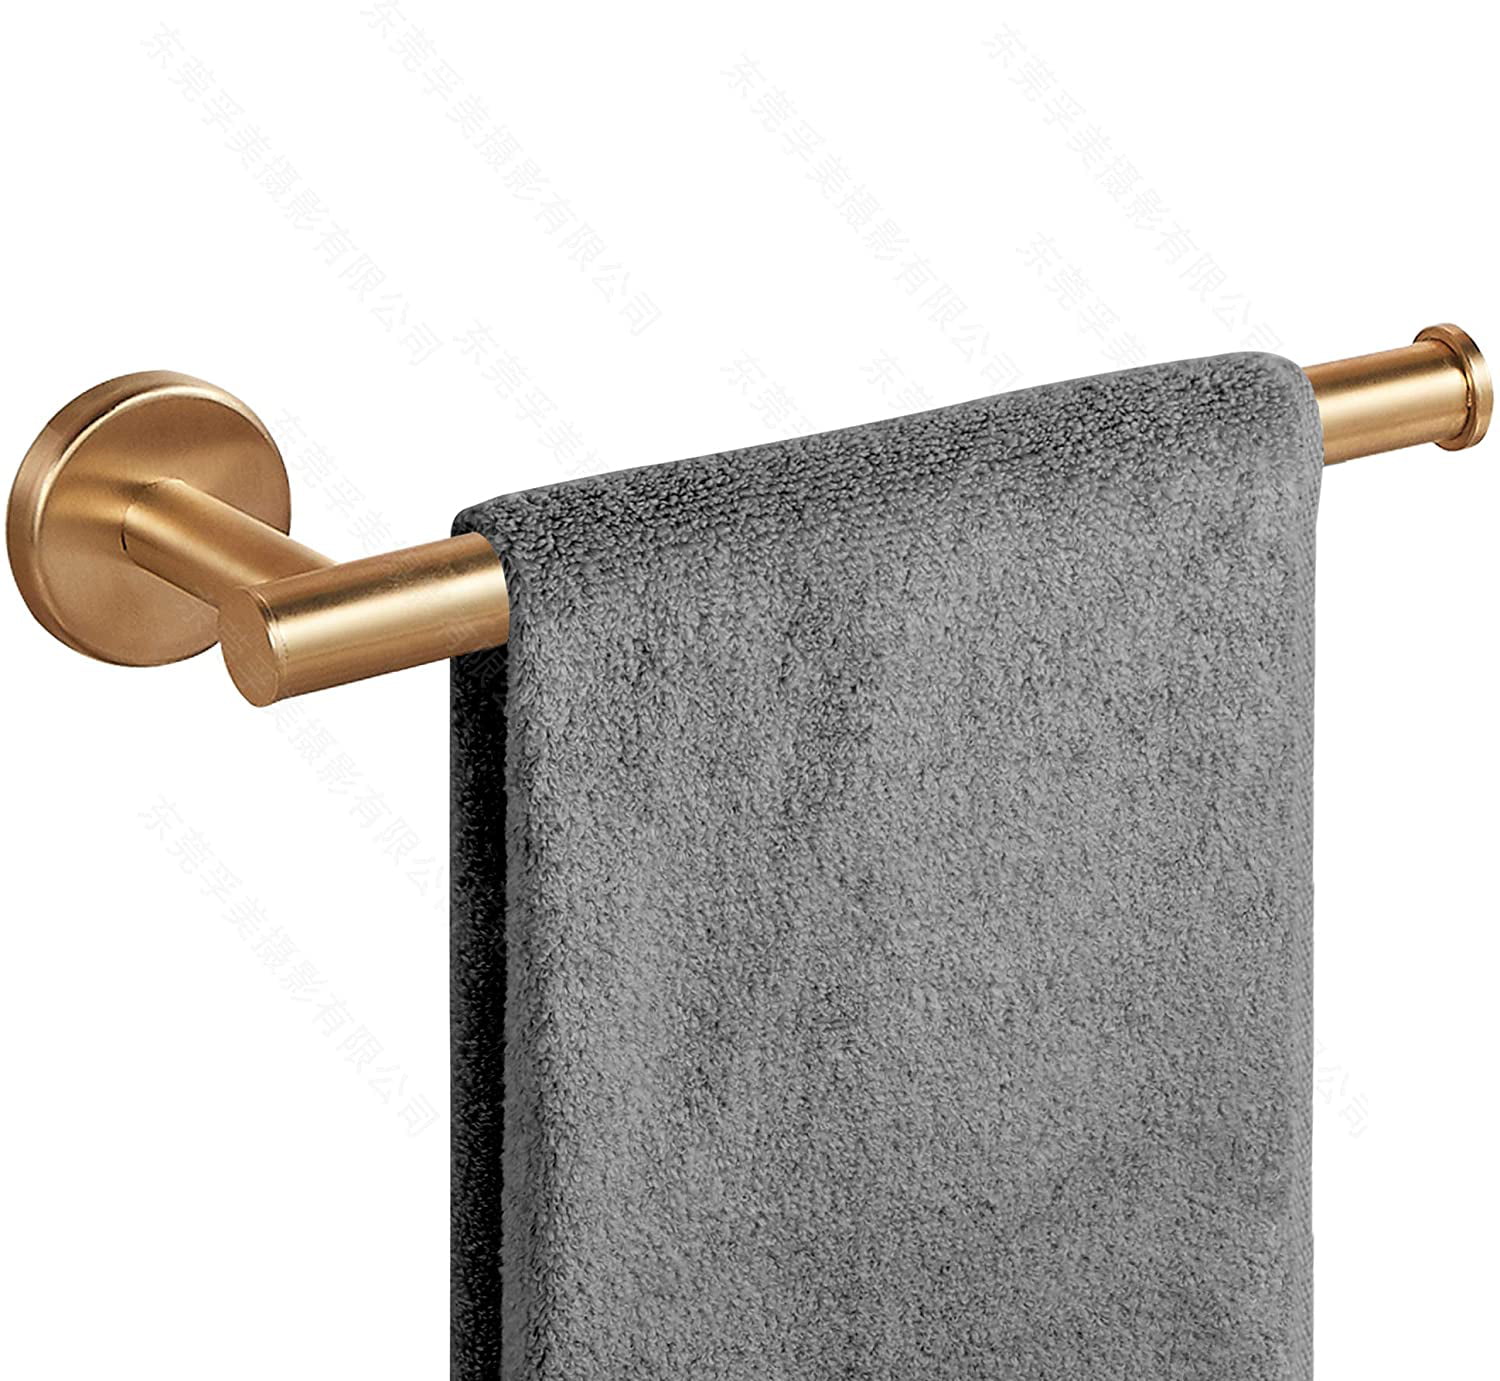 Kitchen Dish Cloths Hanger Cosyland 16 inch Gold Wall Mounted Towel Rail Towel Holder for Bathroom SUS304 Stainless Steel Towel Rack